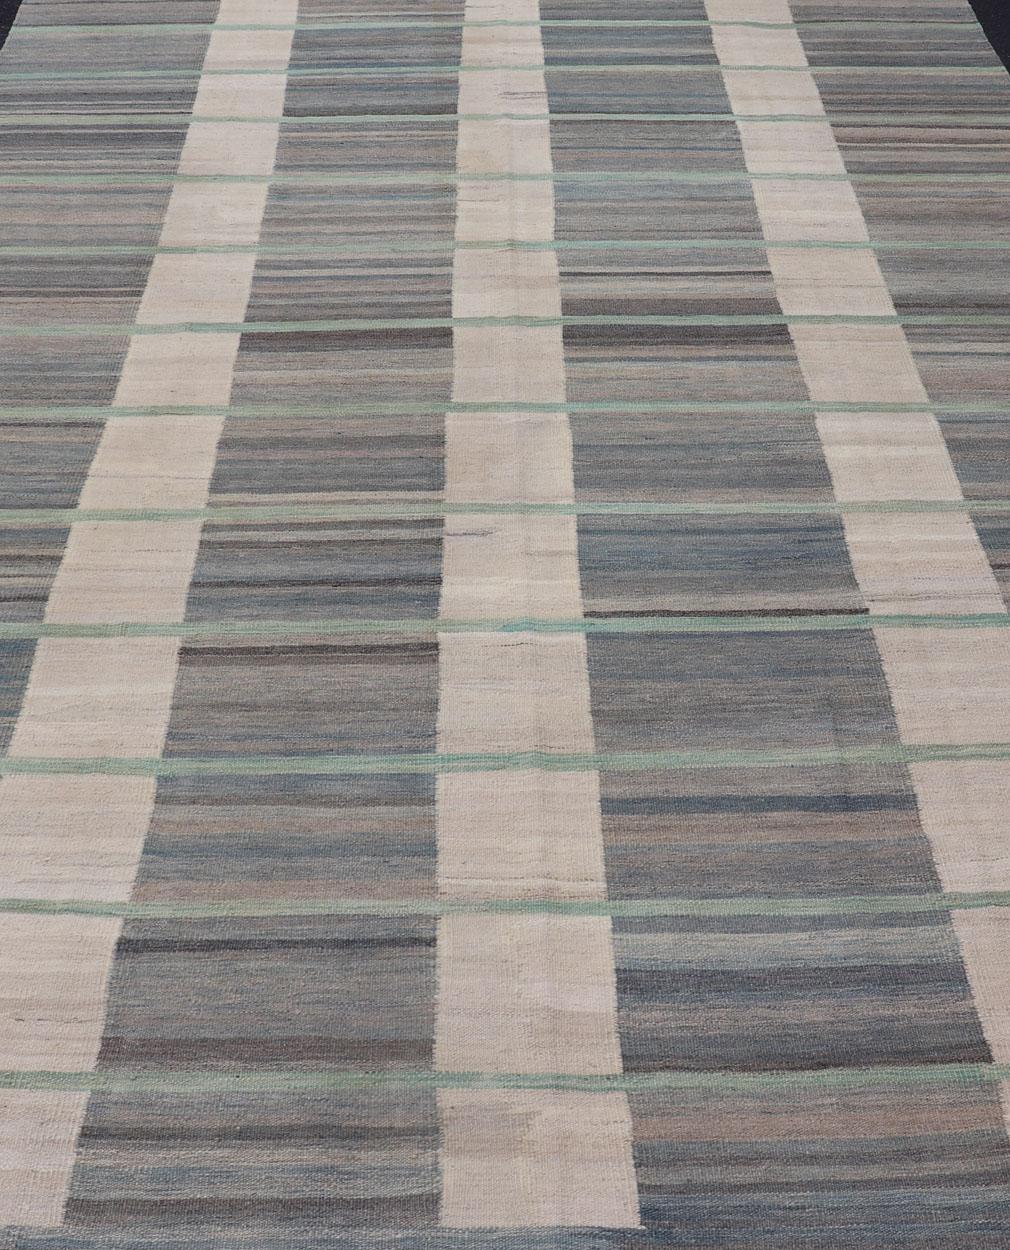  Flat-Weave Modern Kilim Rug in shades of Gray, Brown, Cream, Blue and Green In Excellent Condition For Sale In Atlanta, GA